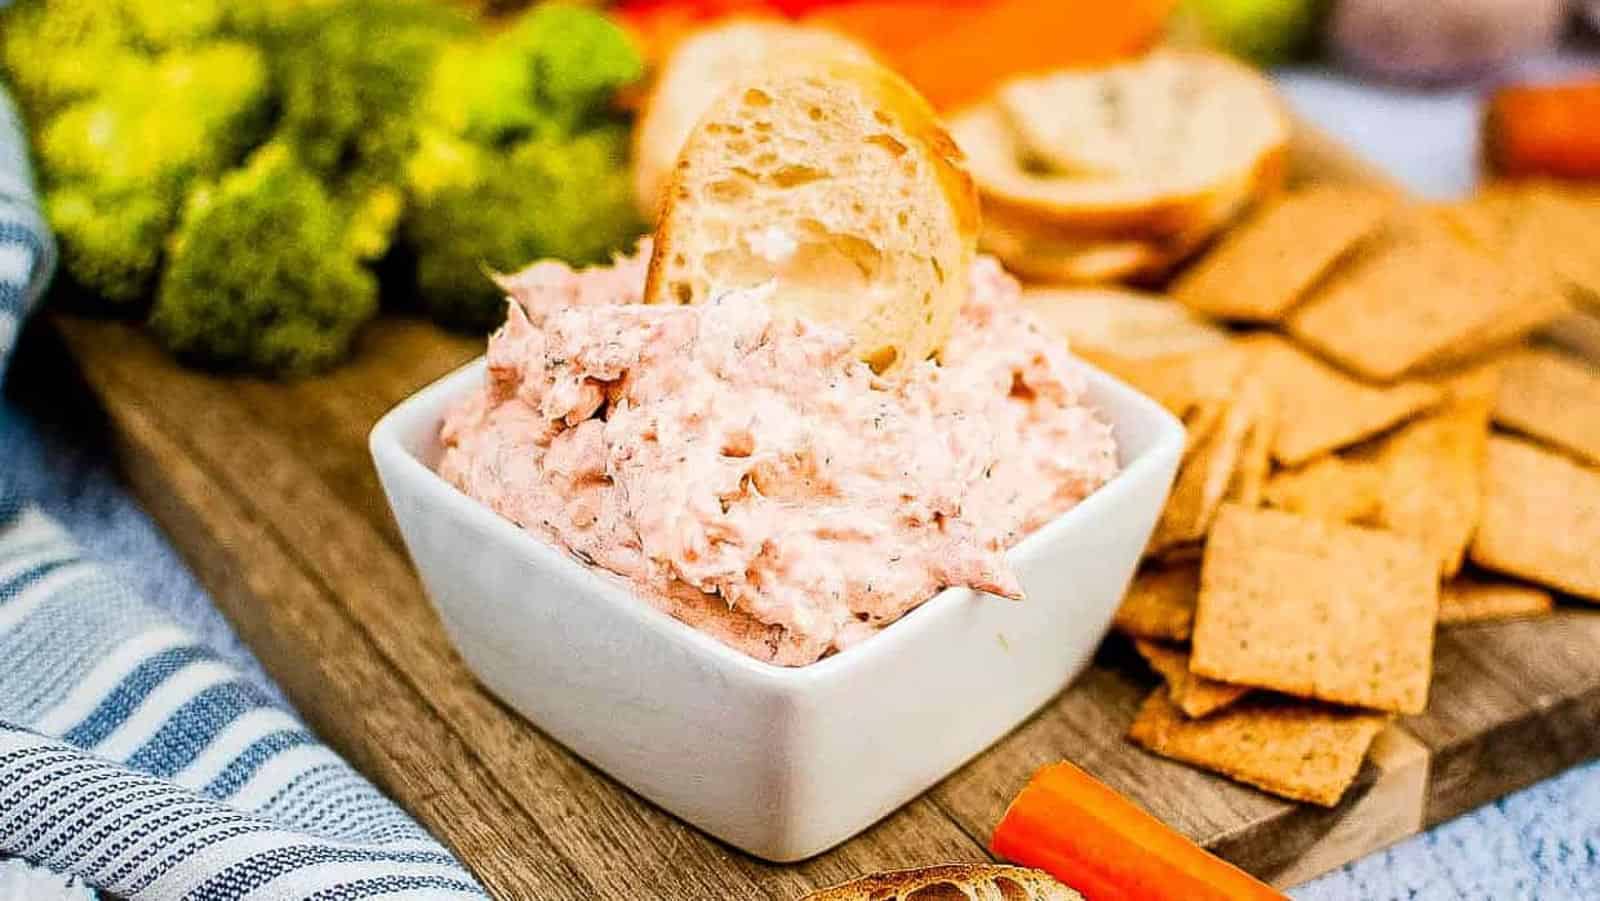 Smoked salmon dip in a bowl with crackers and veggies for dipping.